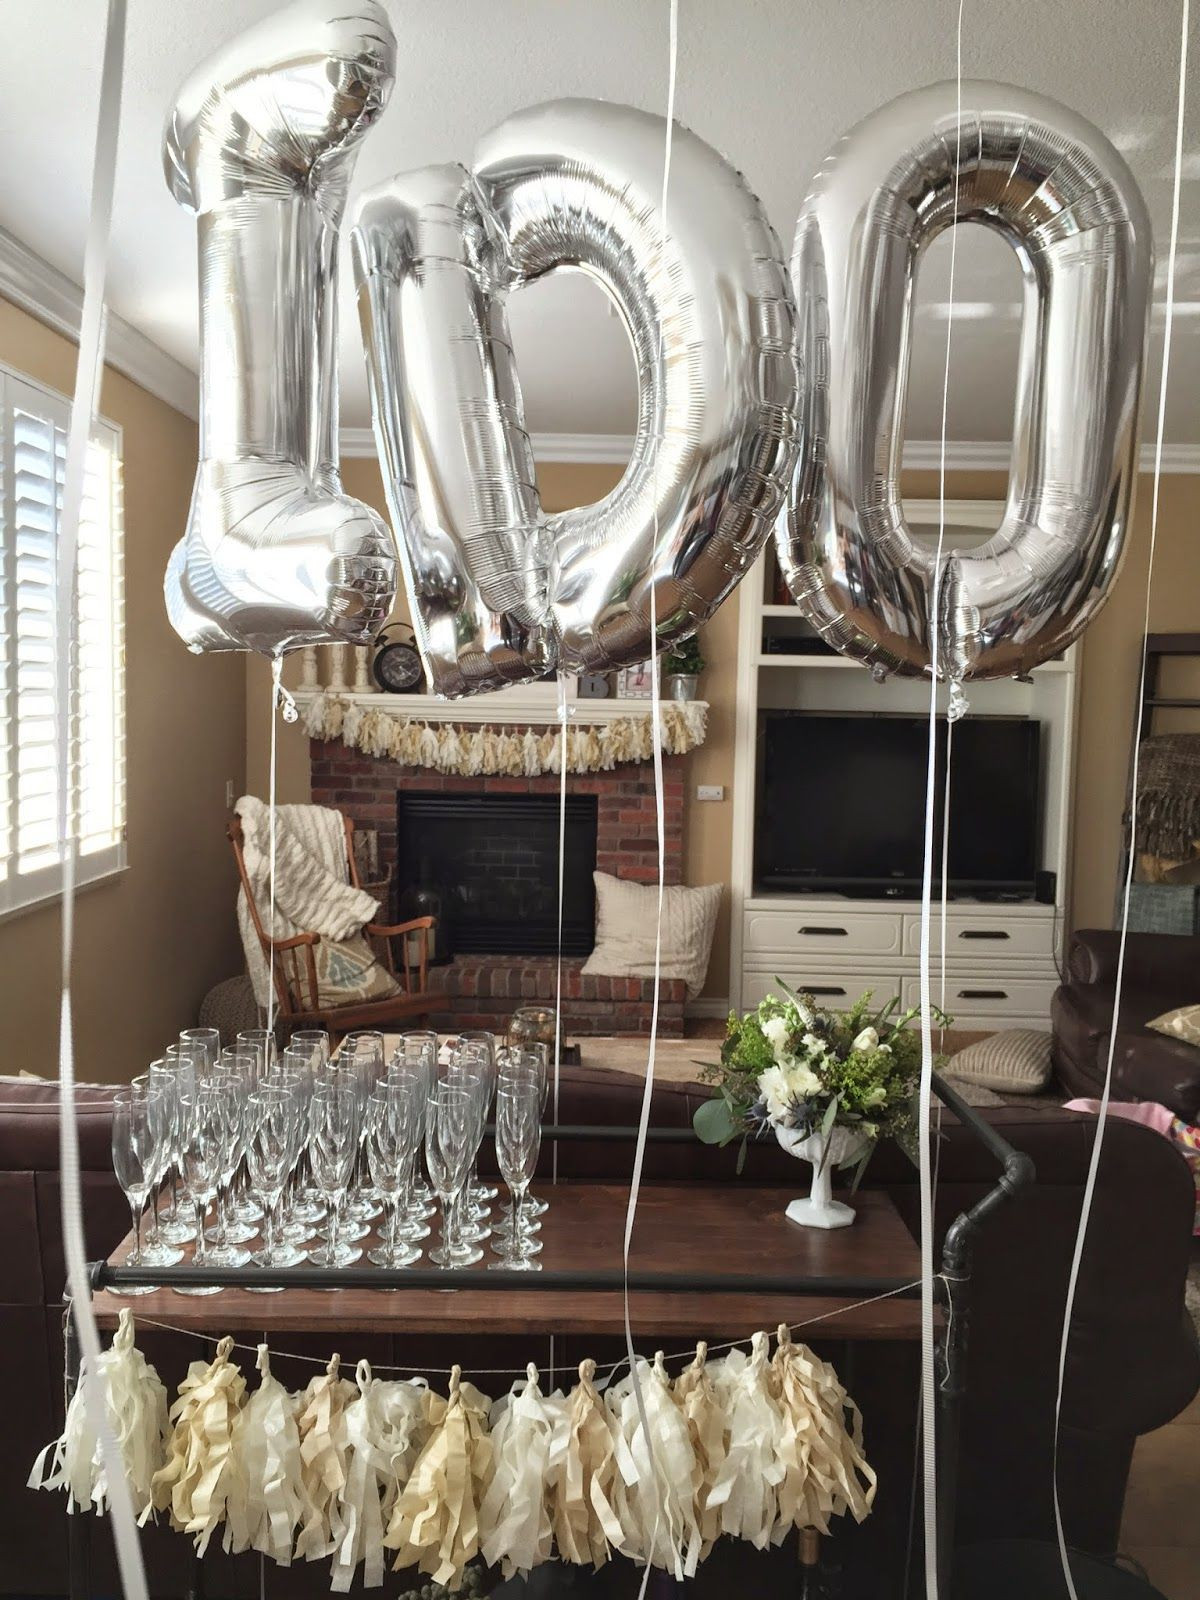 Engagement Party Ideas Pinterest
 Gold silver and white engagement party